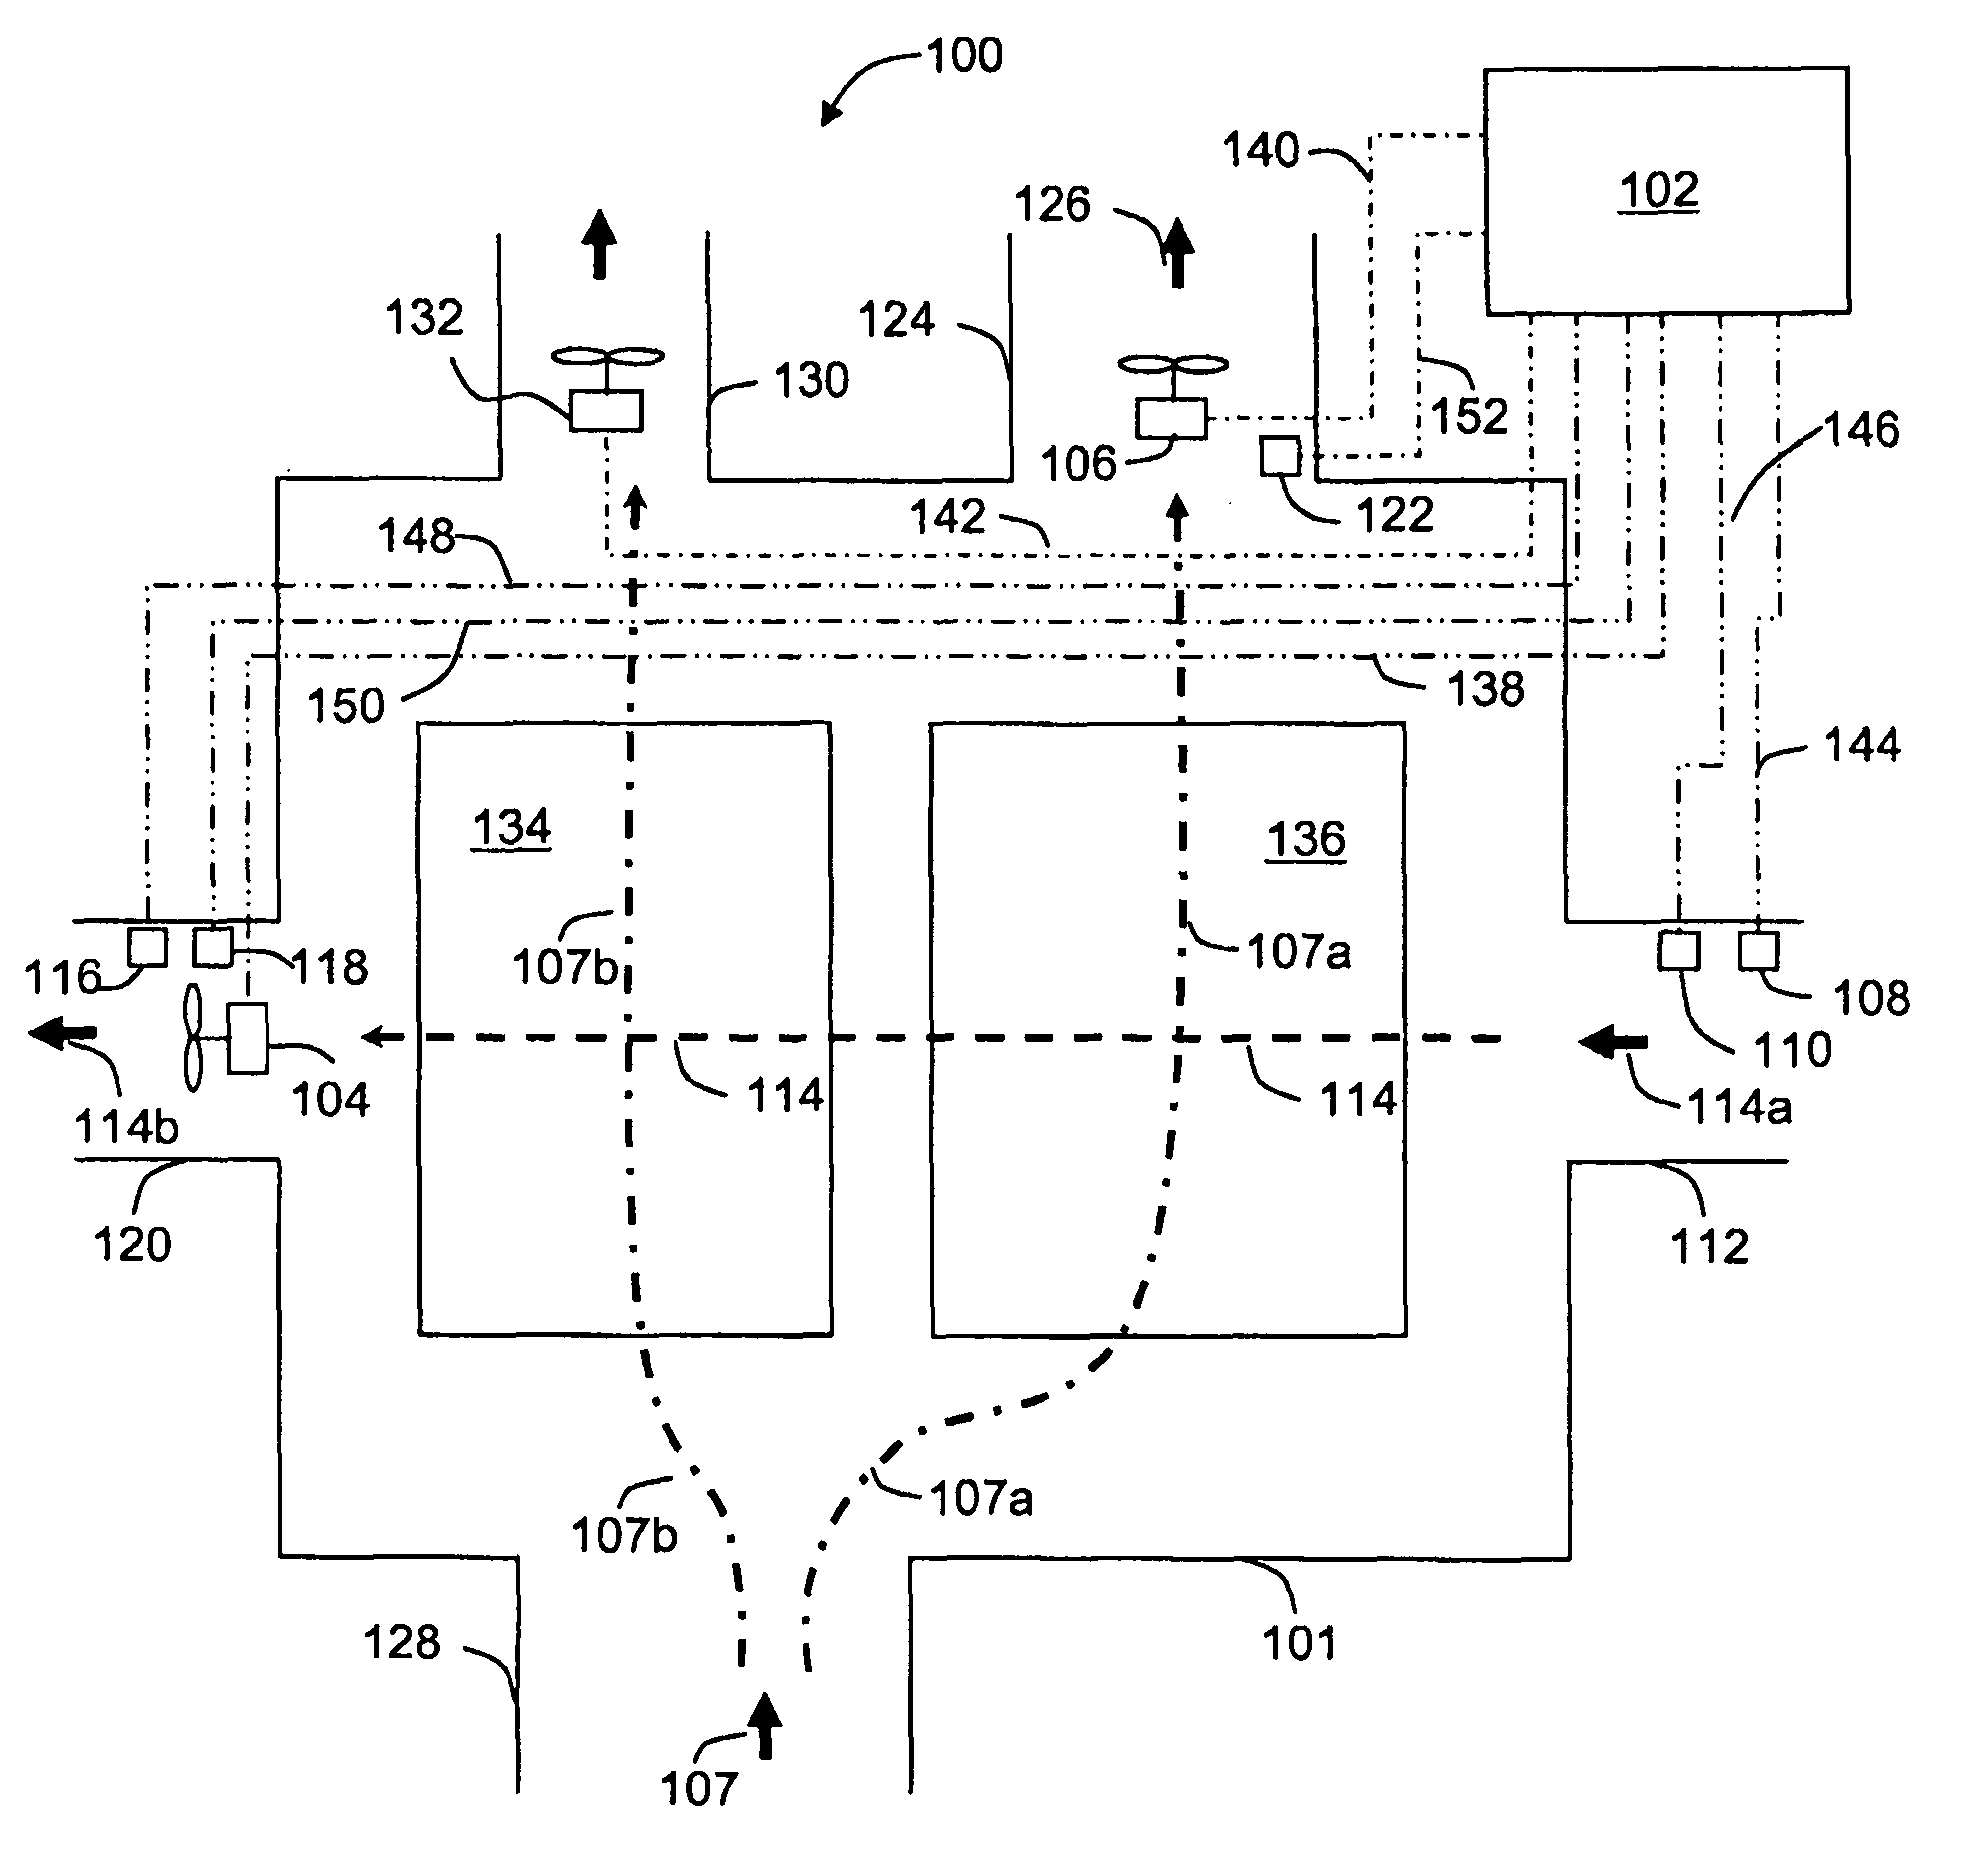 Method and apparatus for controlling ventilation systems